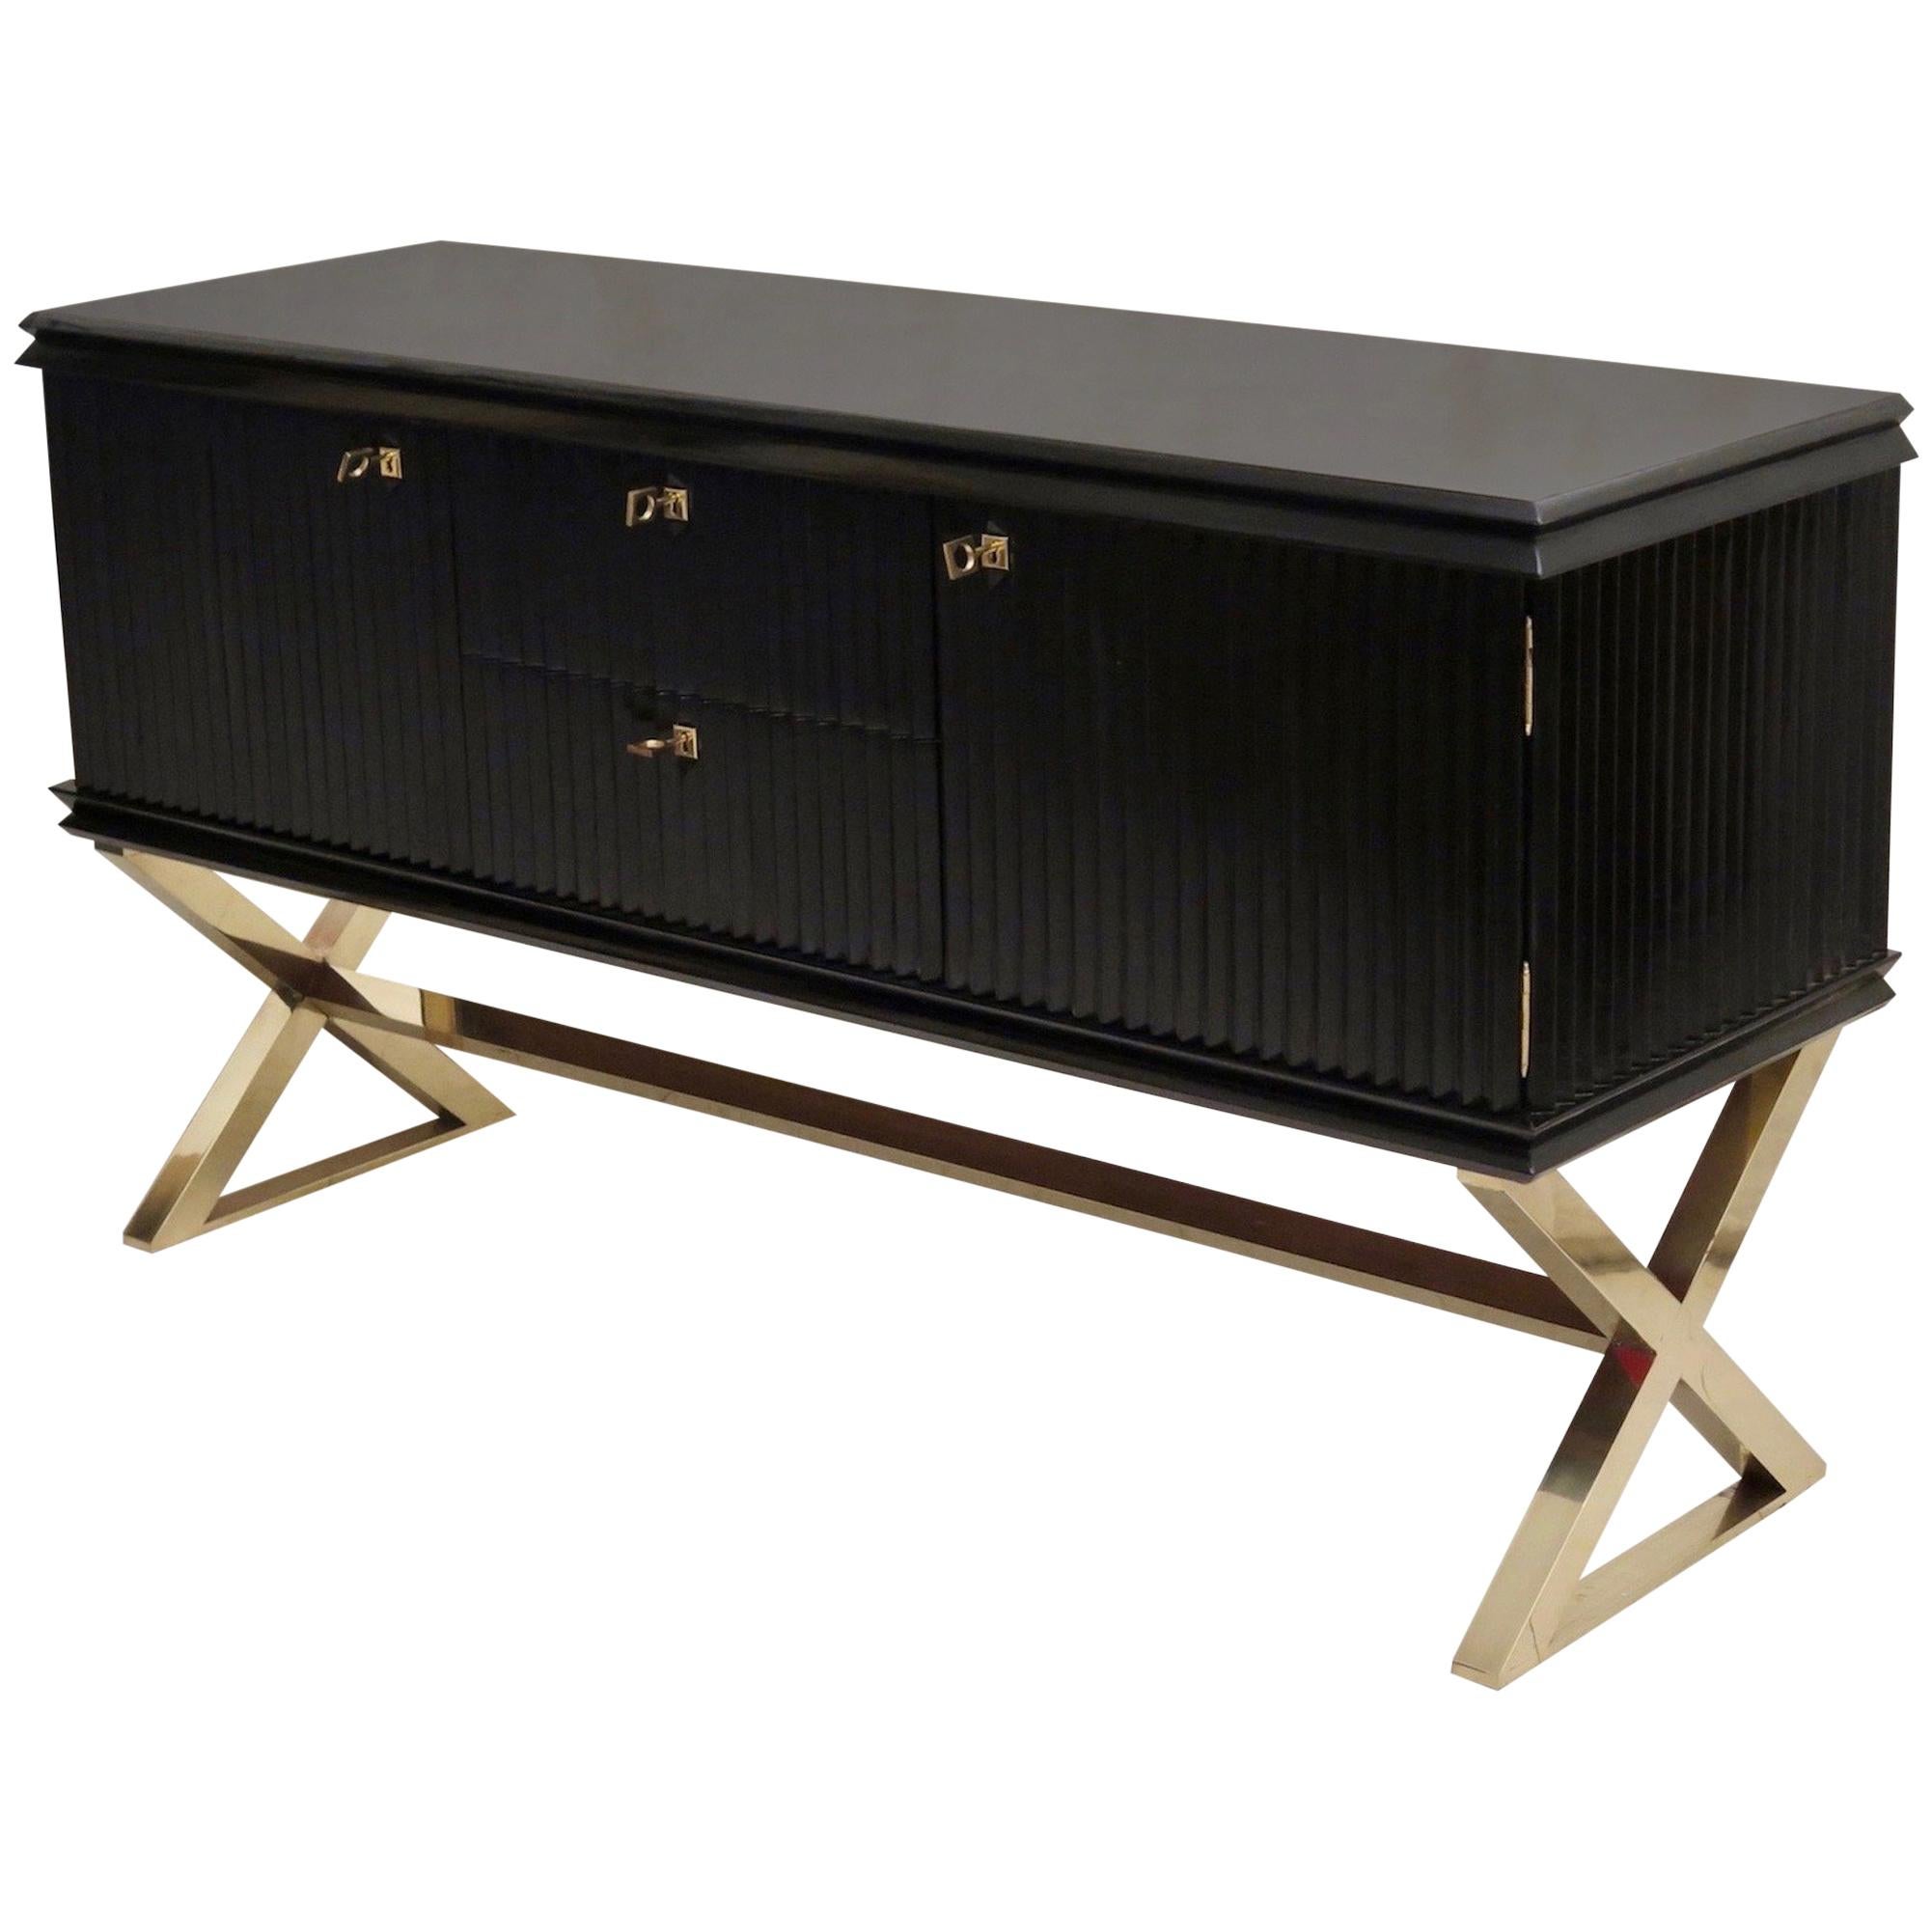 1950 Black Shellac and Brass Italian Midcentury Sideboard